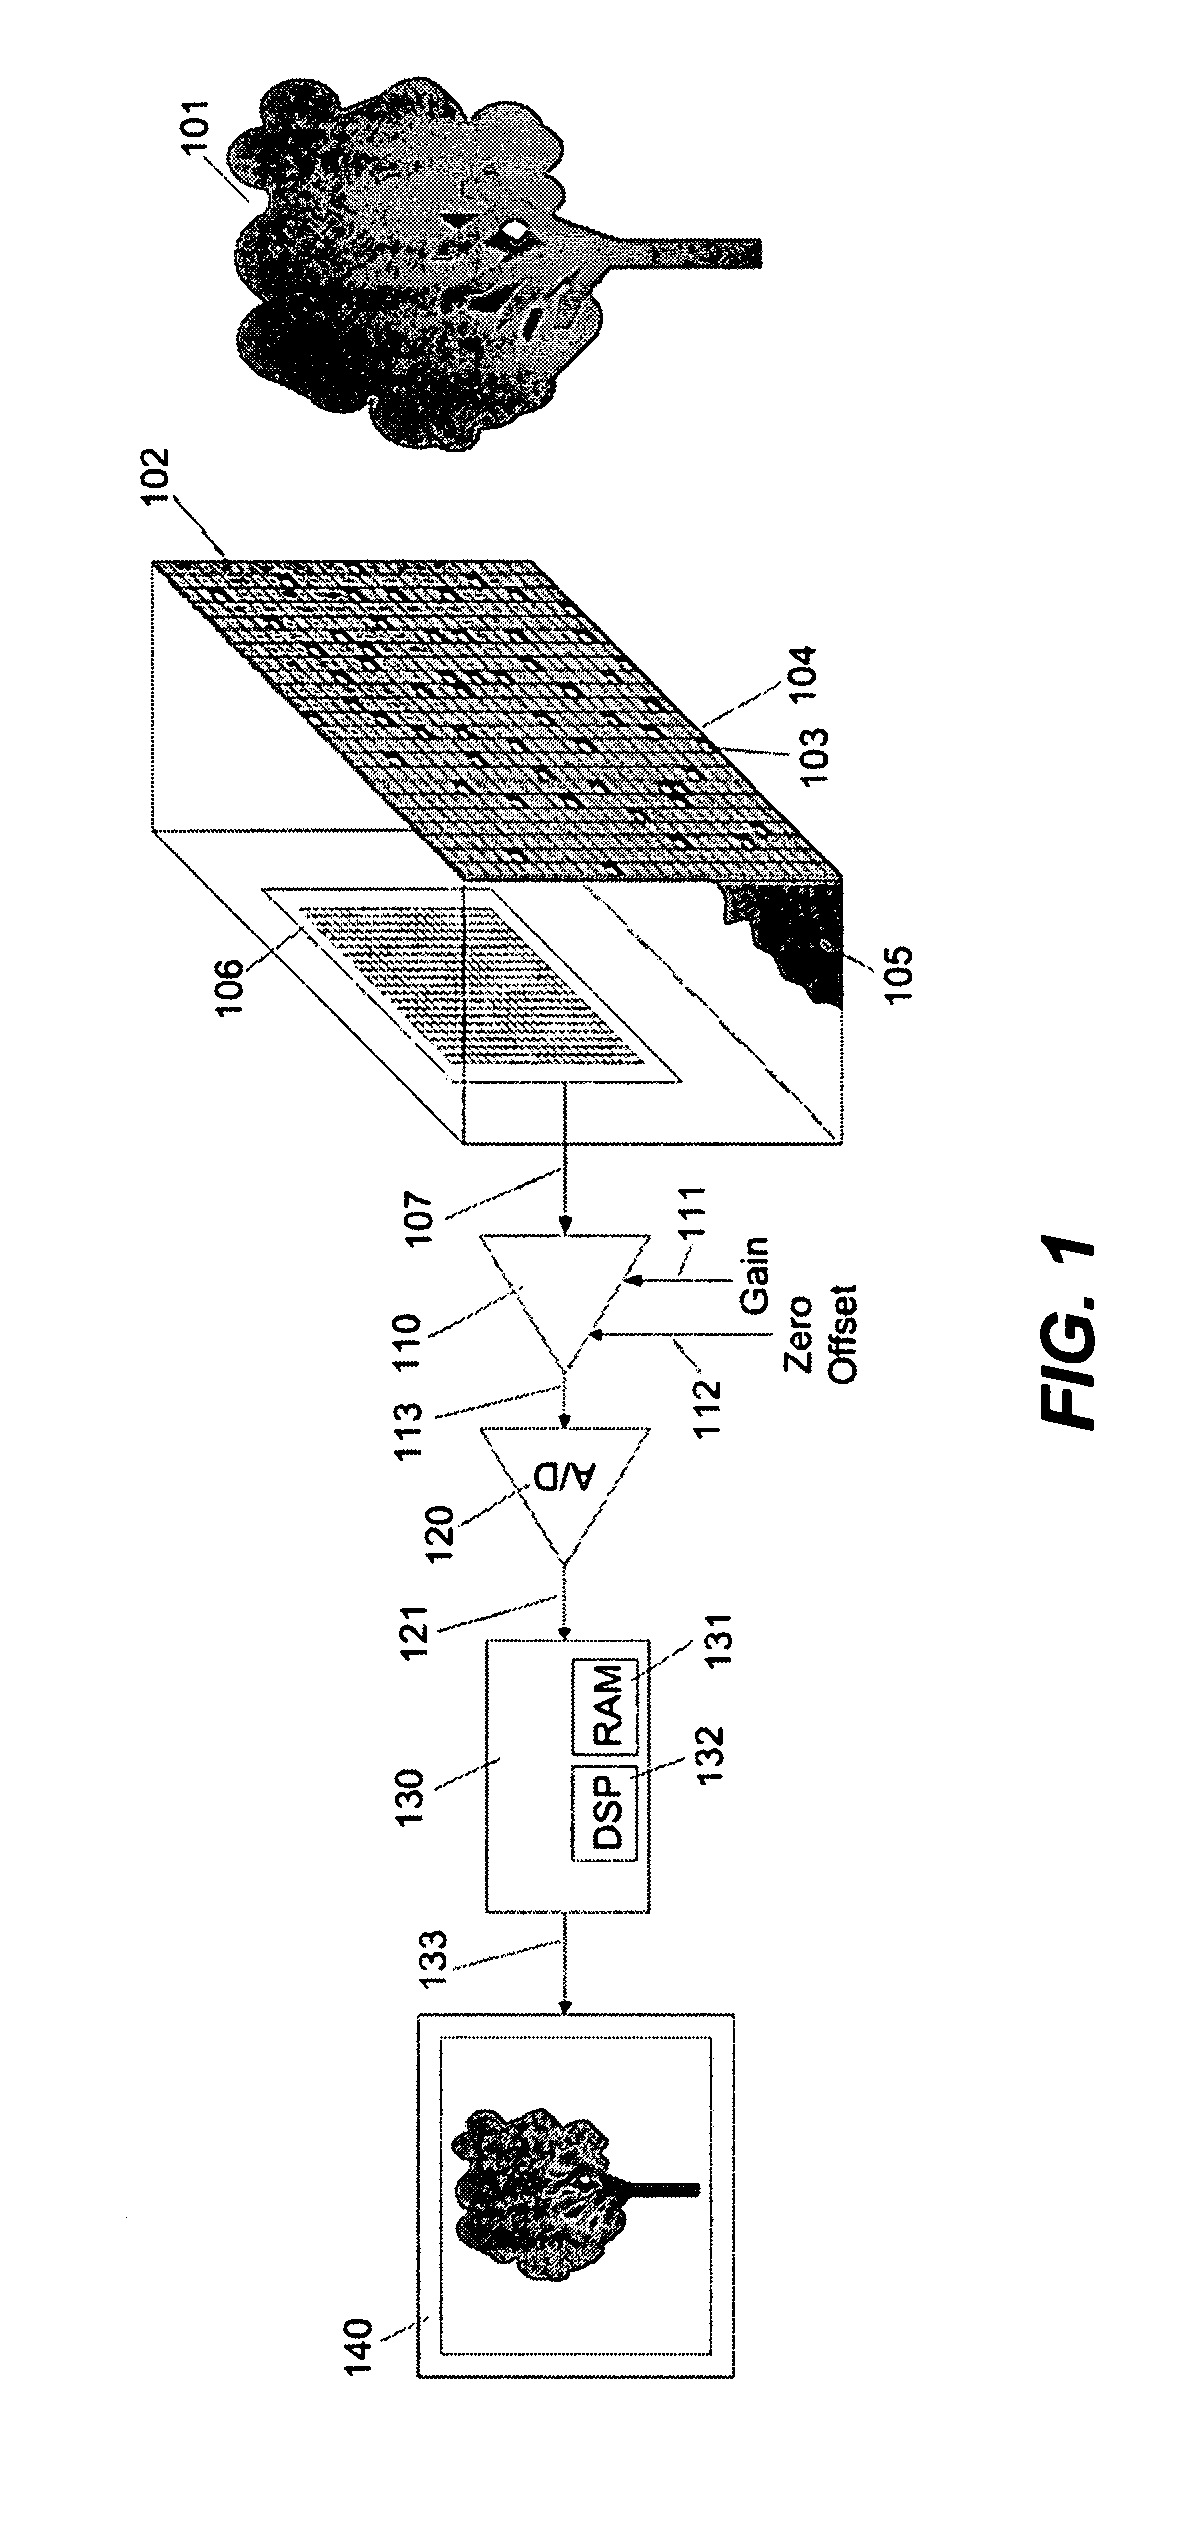 Apparatus and method for capturing still images and video using coded aperture techniques